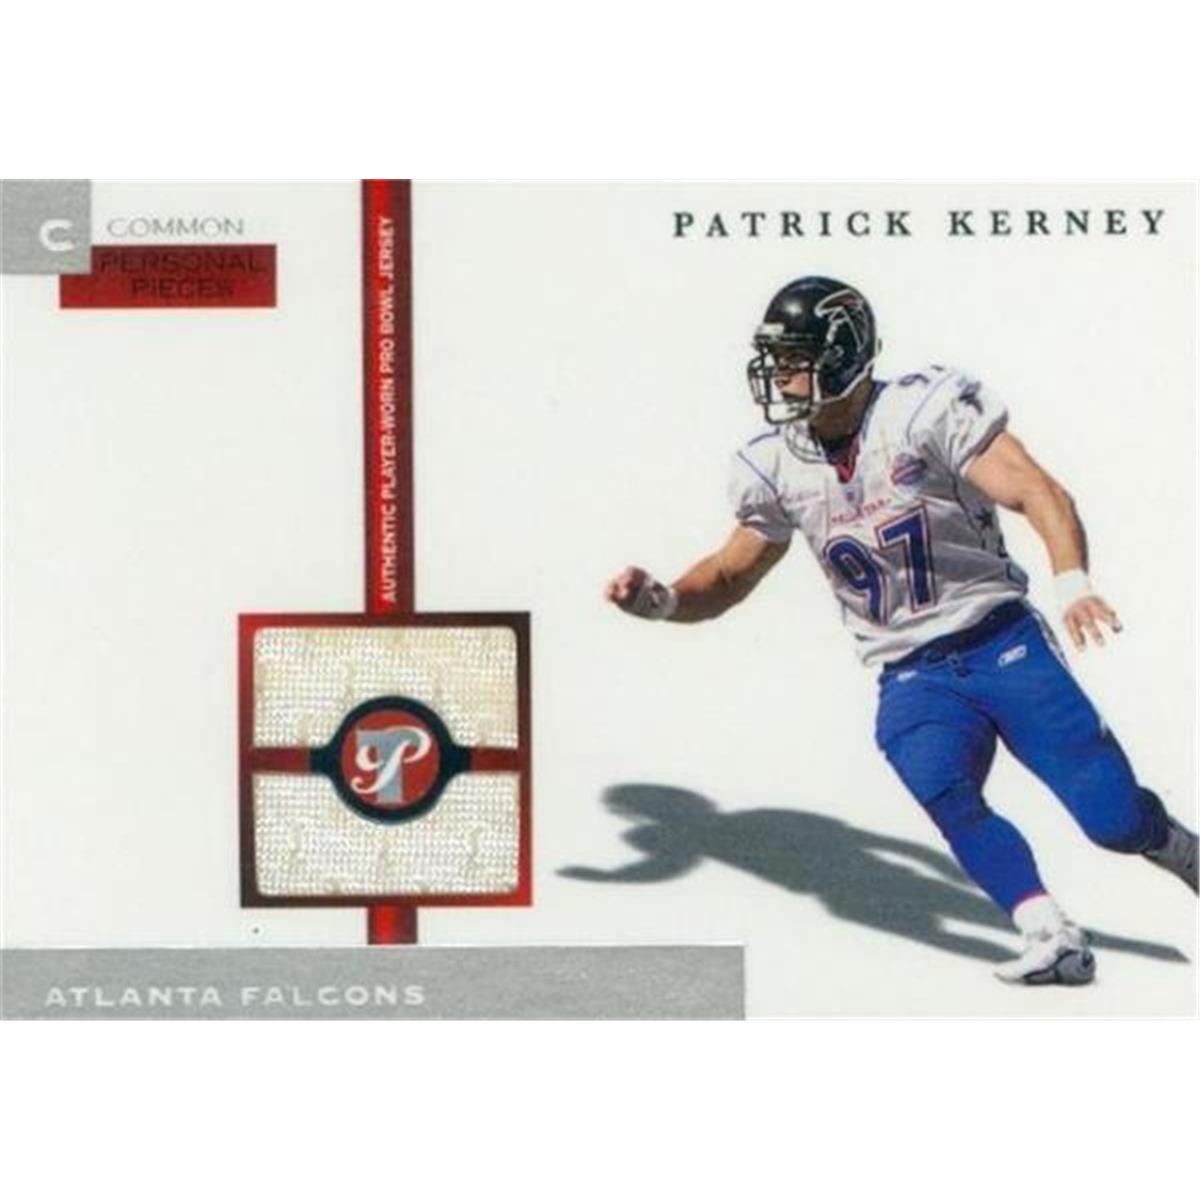 Picture of Autograph Warehouse 409302 Patrick Kerney Player Worn Jersey Patch Football Card - Baltimore Ravens 2005 Topps Common Personal Pieces No.PPCPK LE 647-1000